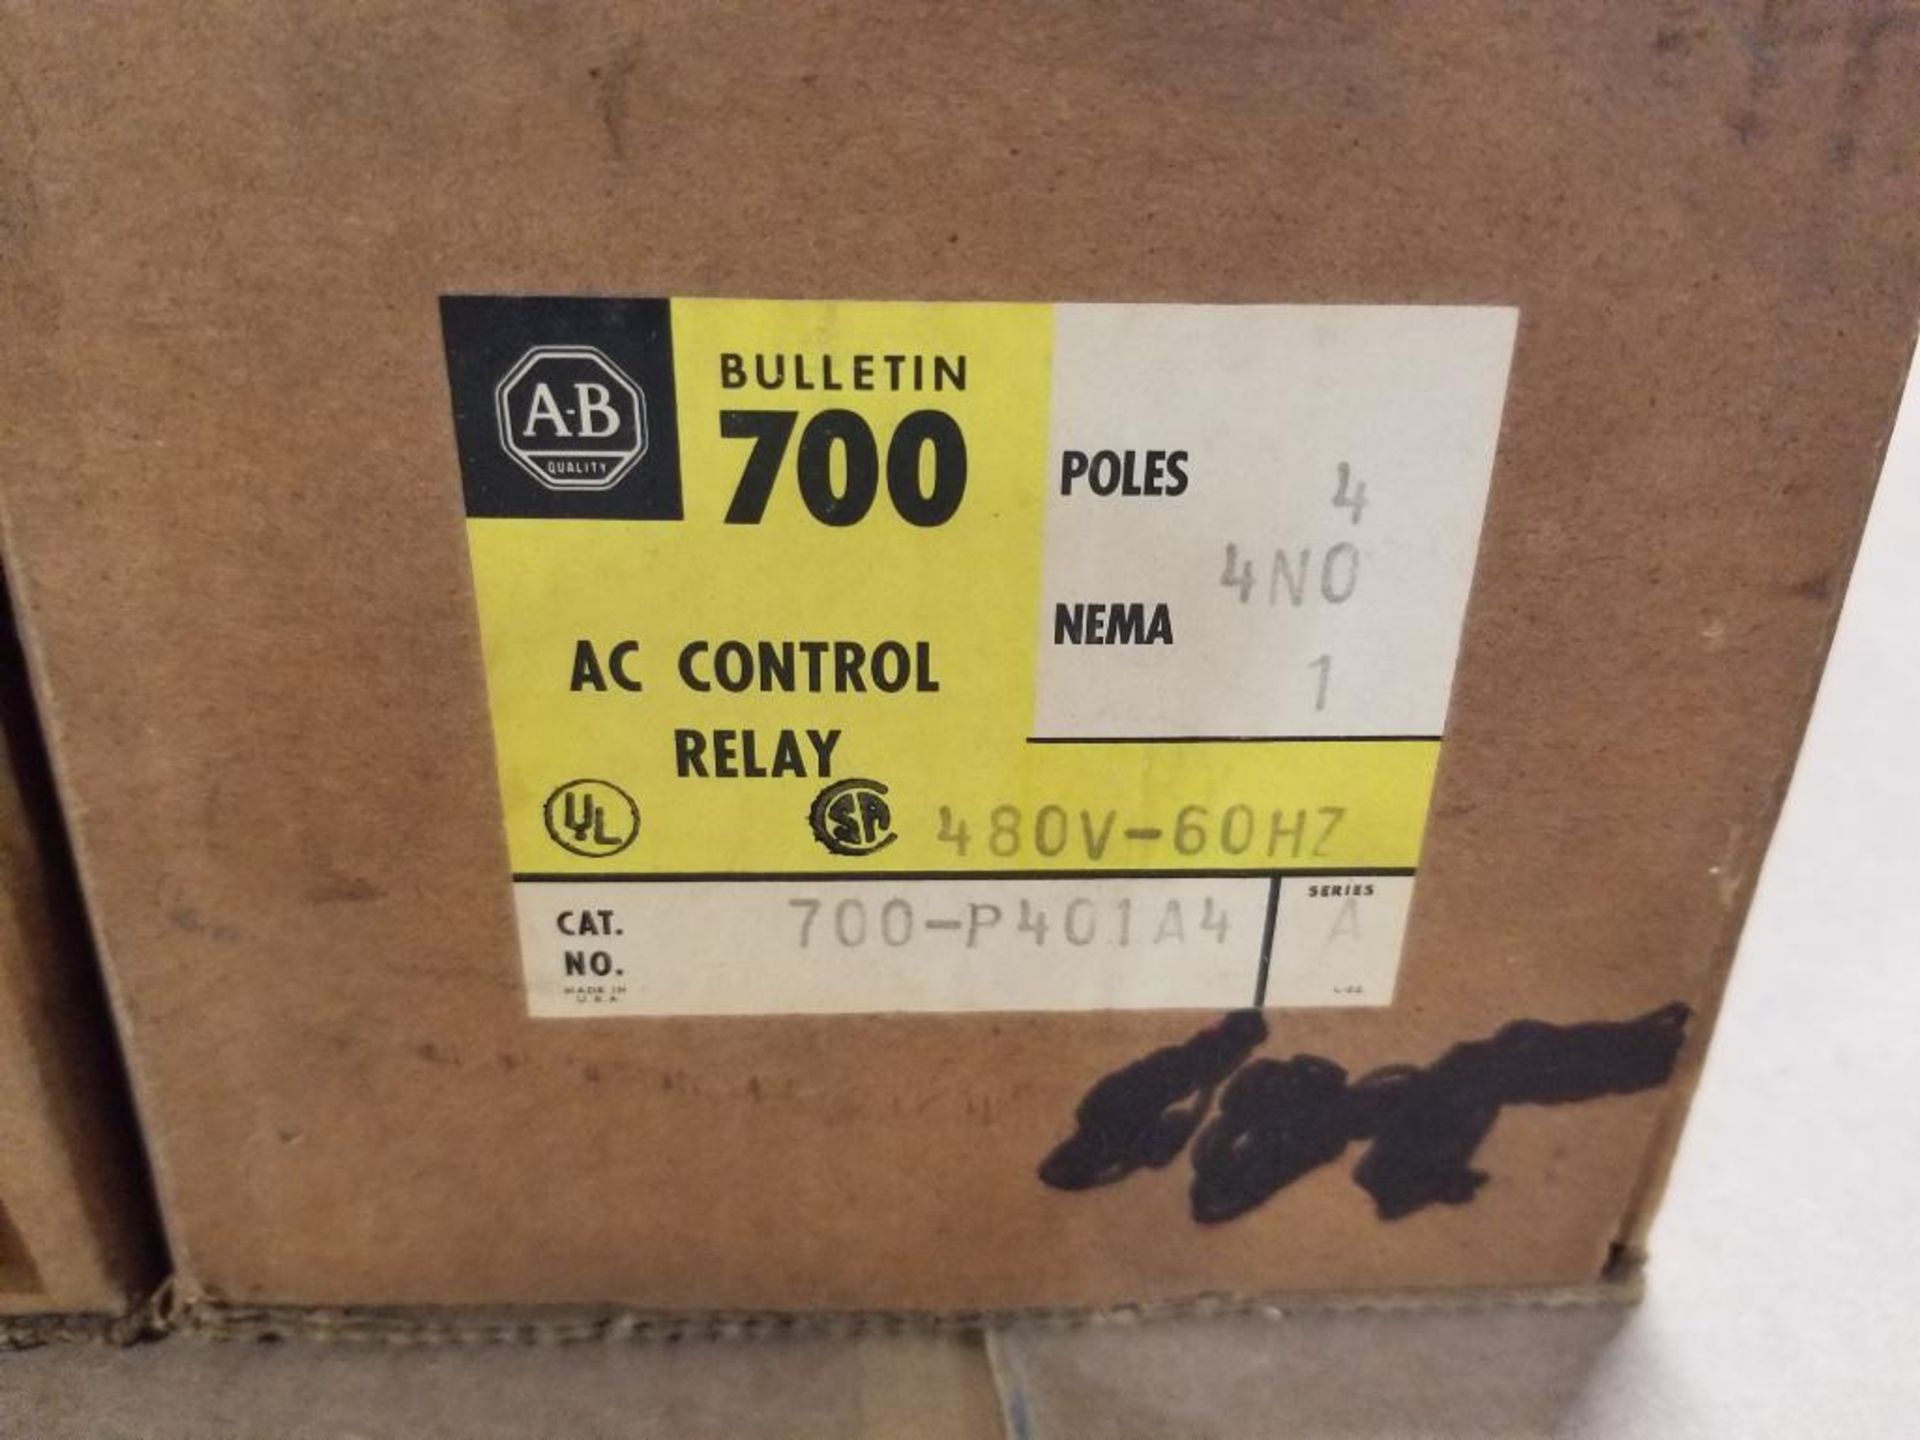 Qty 3 - Allen Bradley contactor. (2) catalog 500-A0D92 and (1) 700-P401A4. - Image 2 of 5